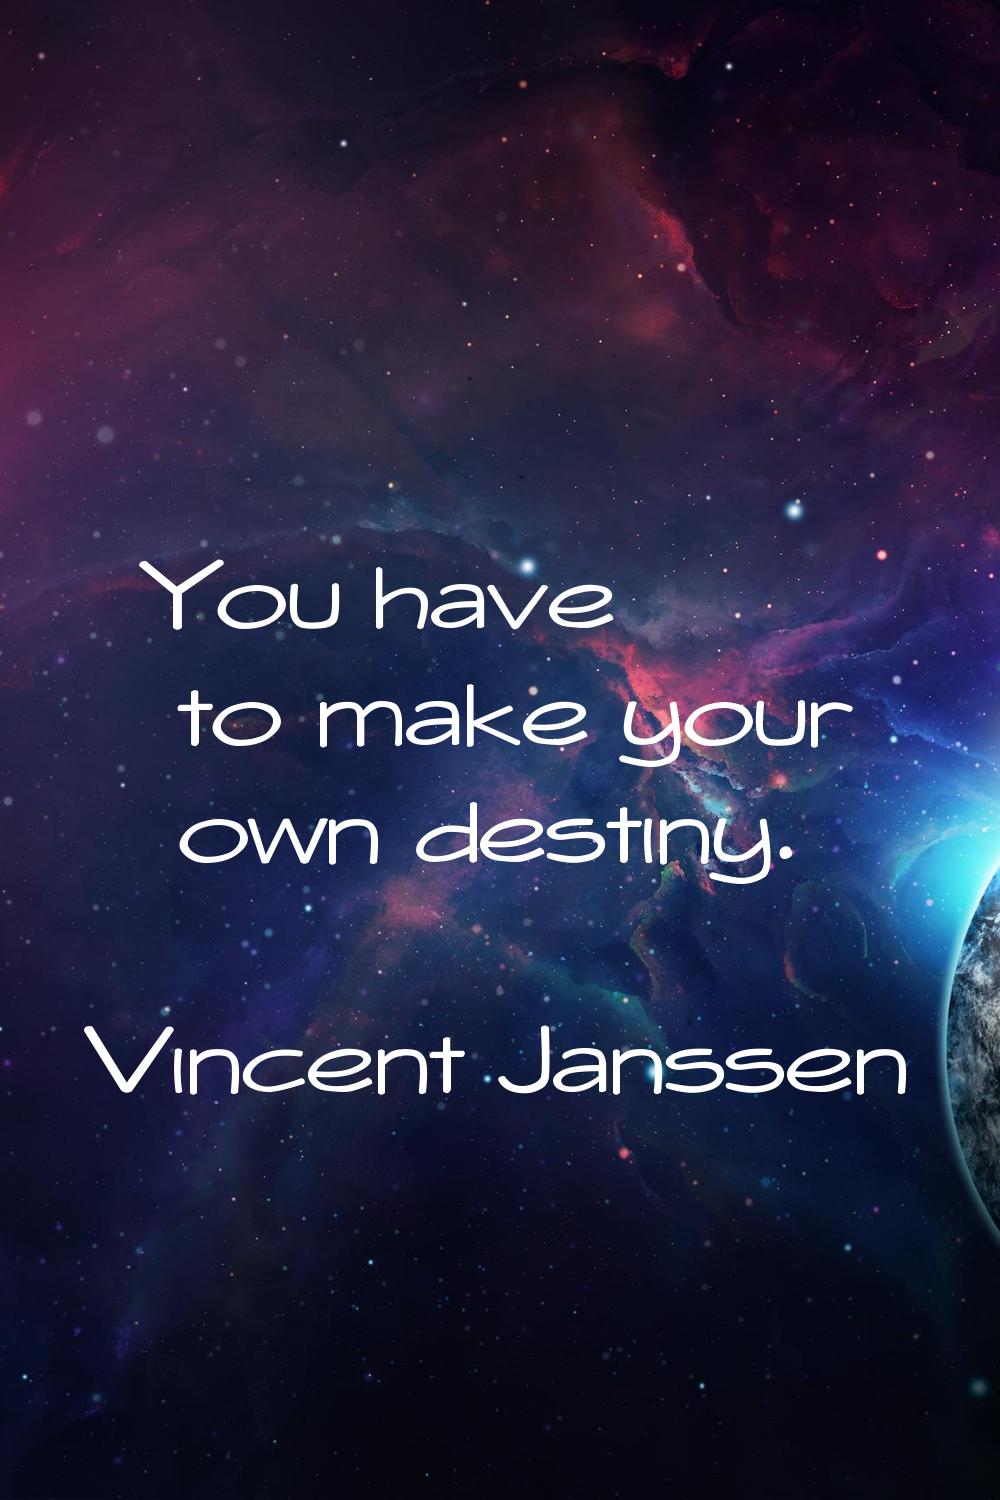 You have to make your own destiny.